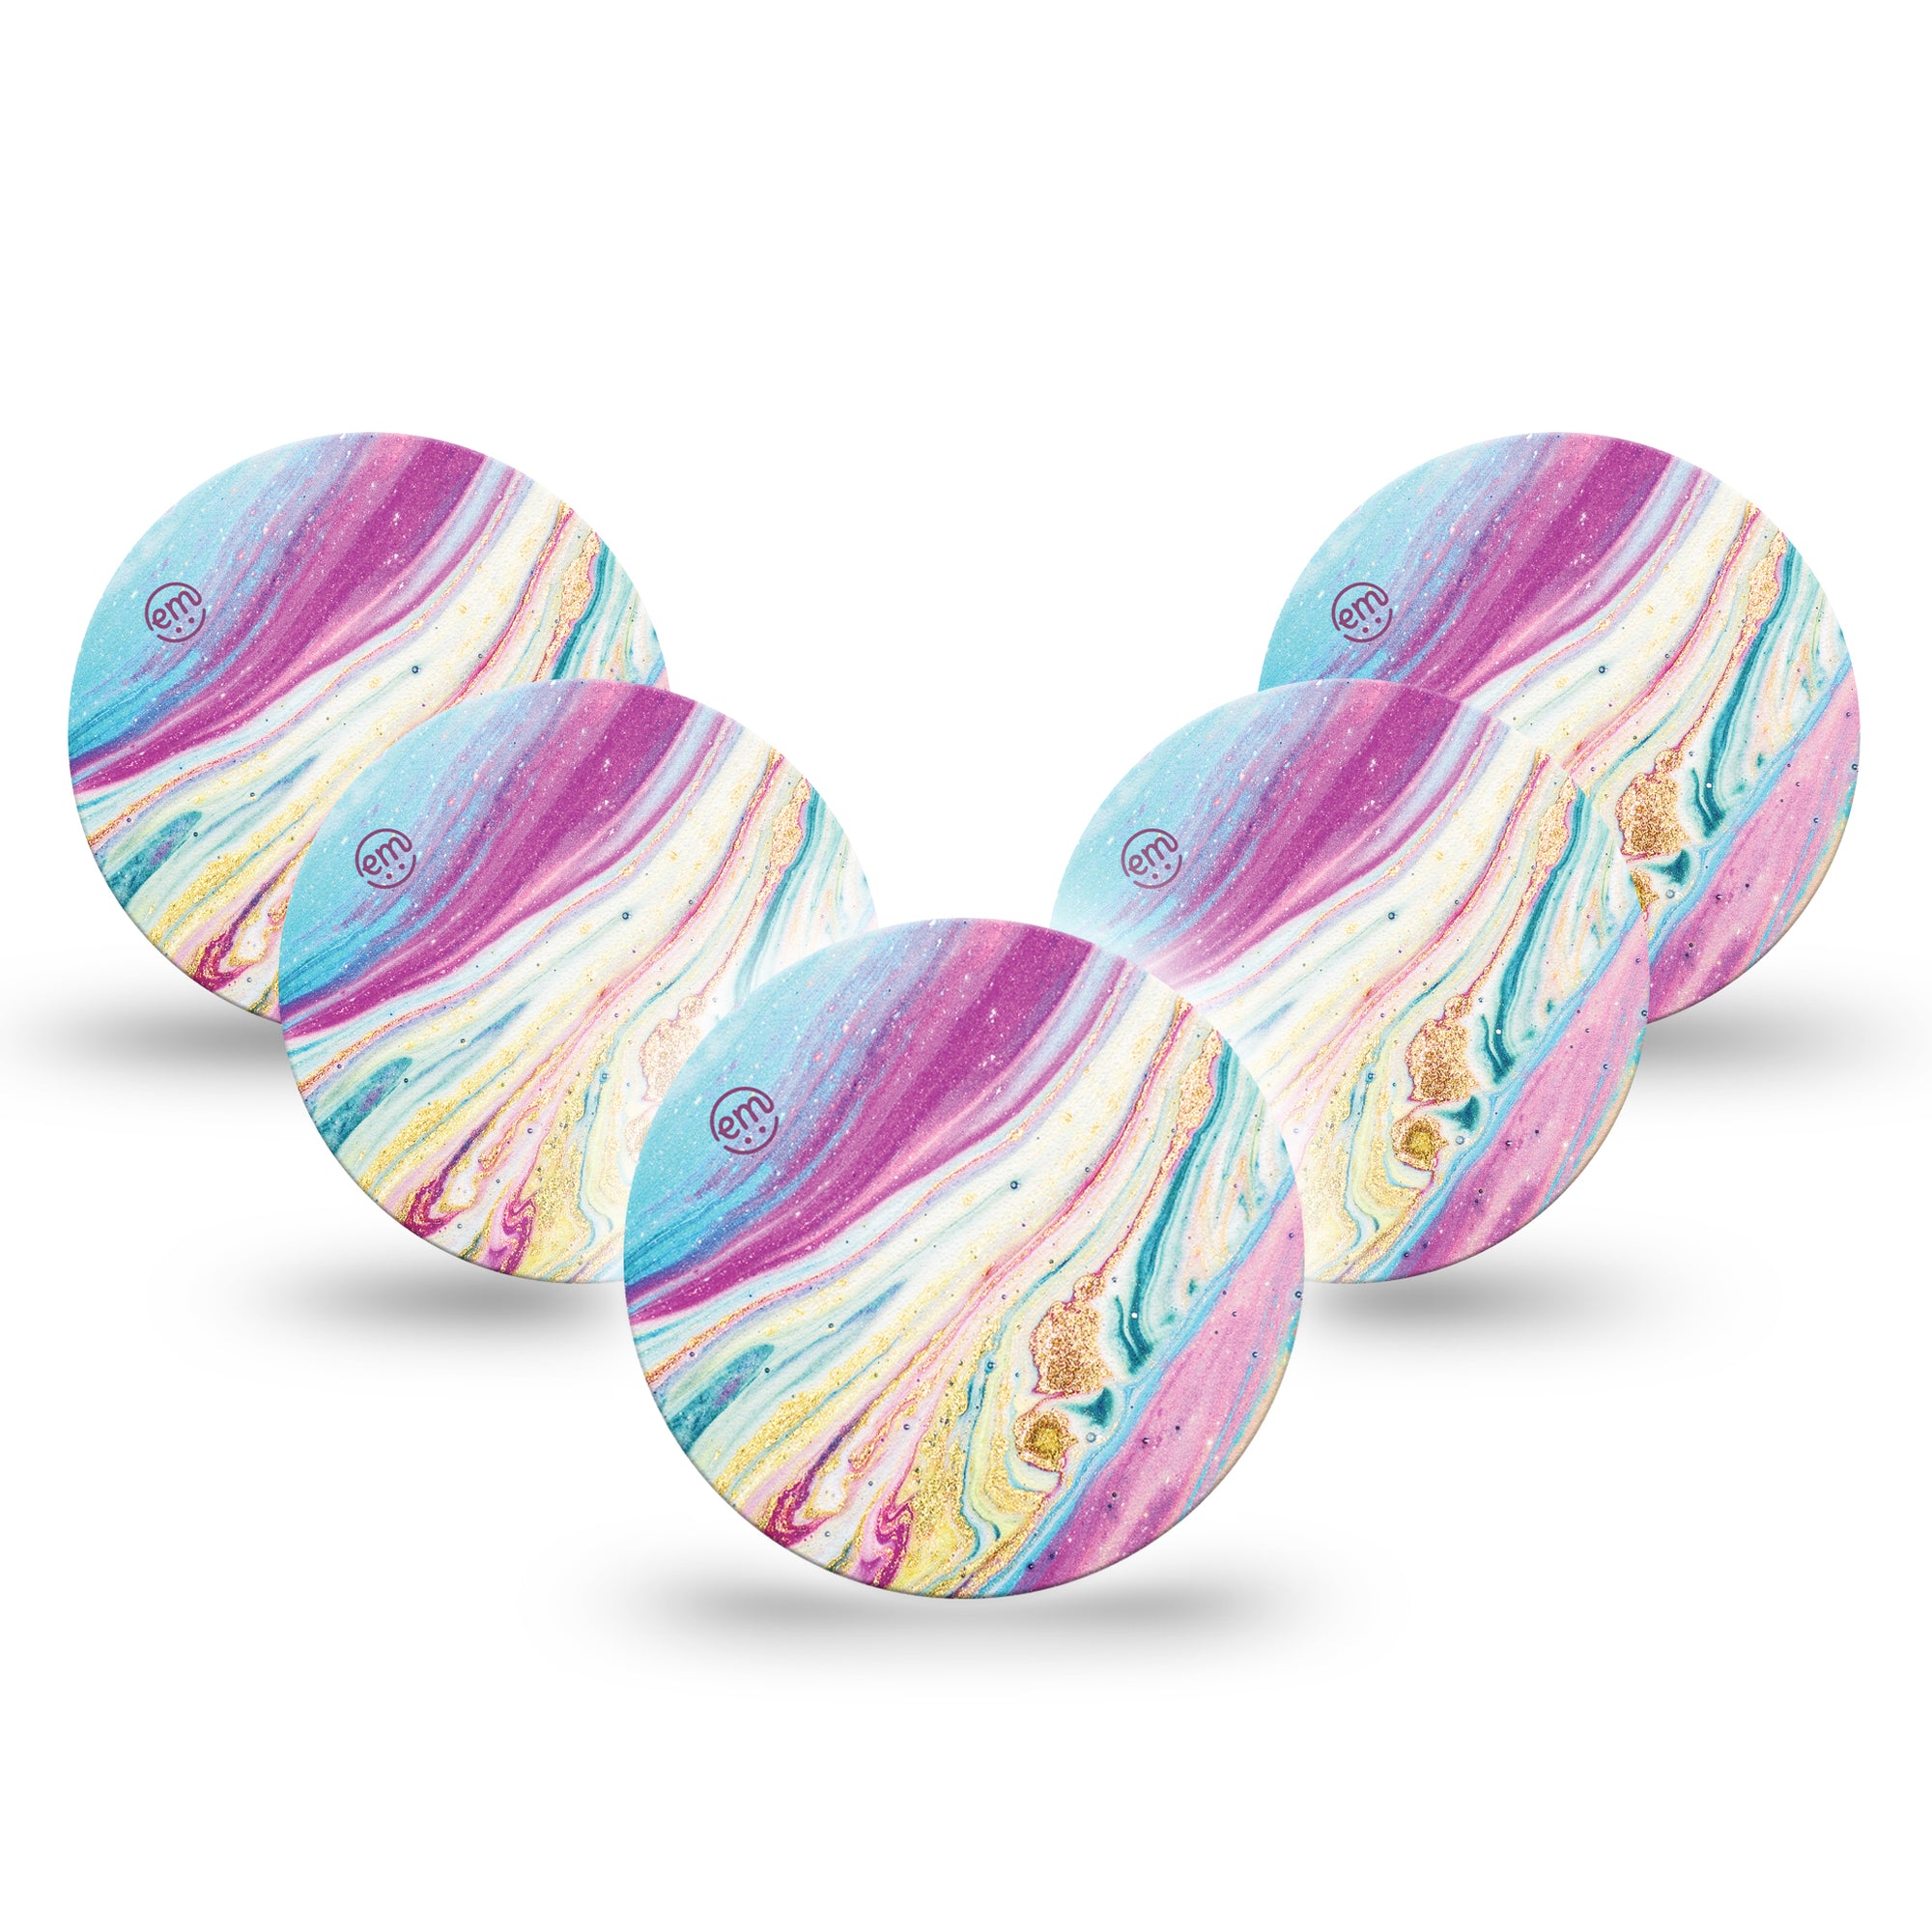 ExpressionMed Shimmering Marble Libre 3 Overpatch, 5-Pack, Glittering Swirls Themed, CGM Adhesive Tape Design